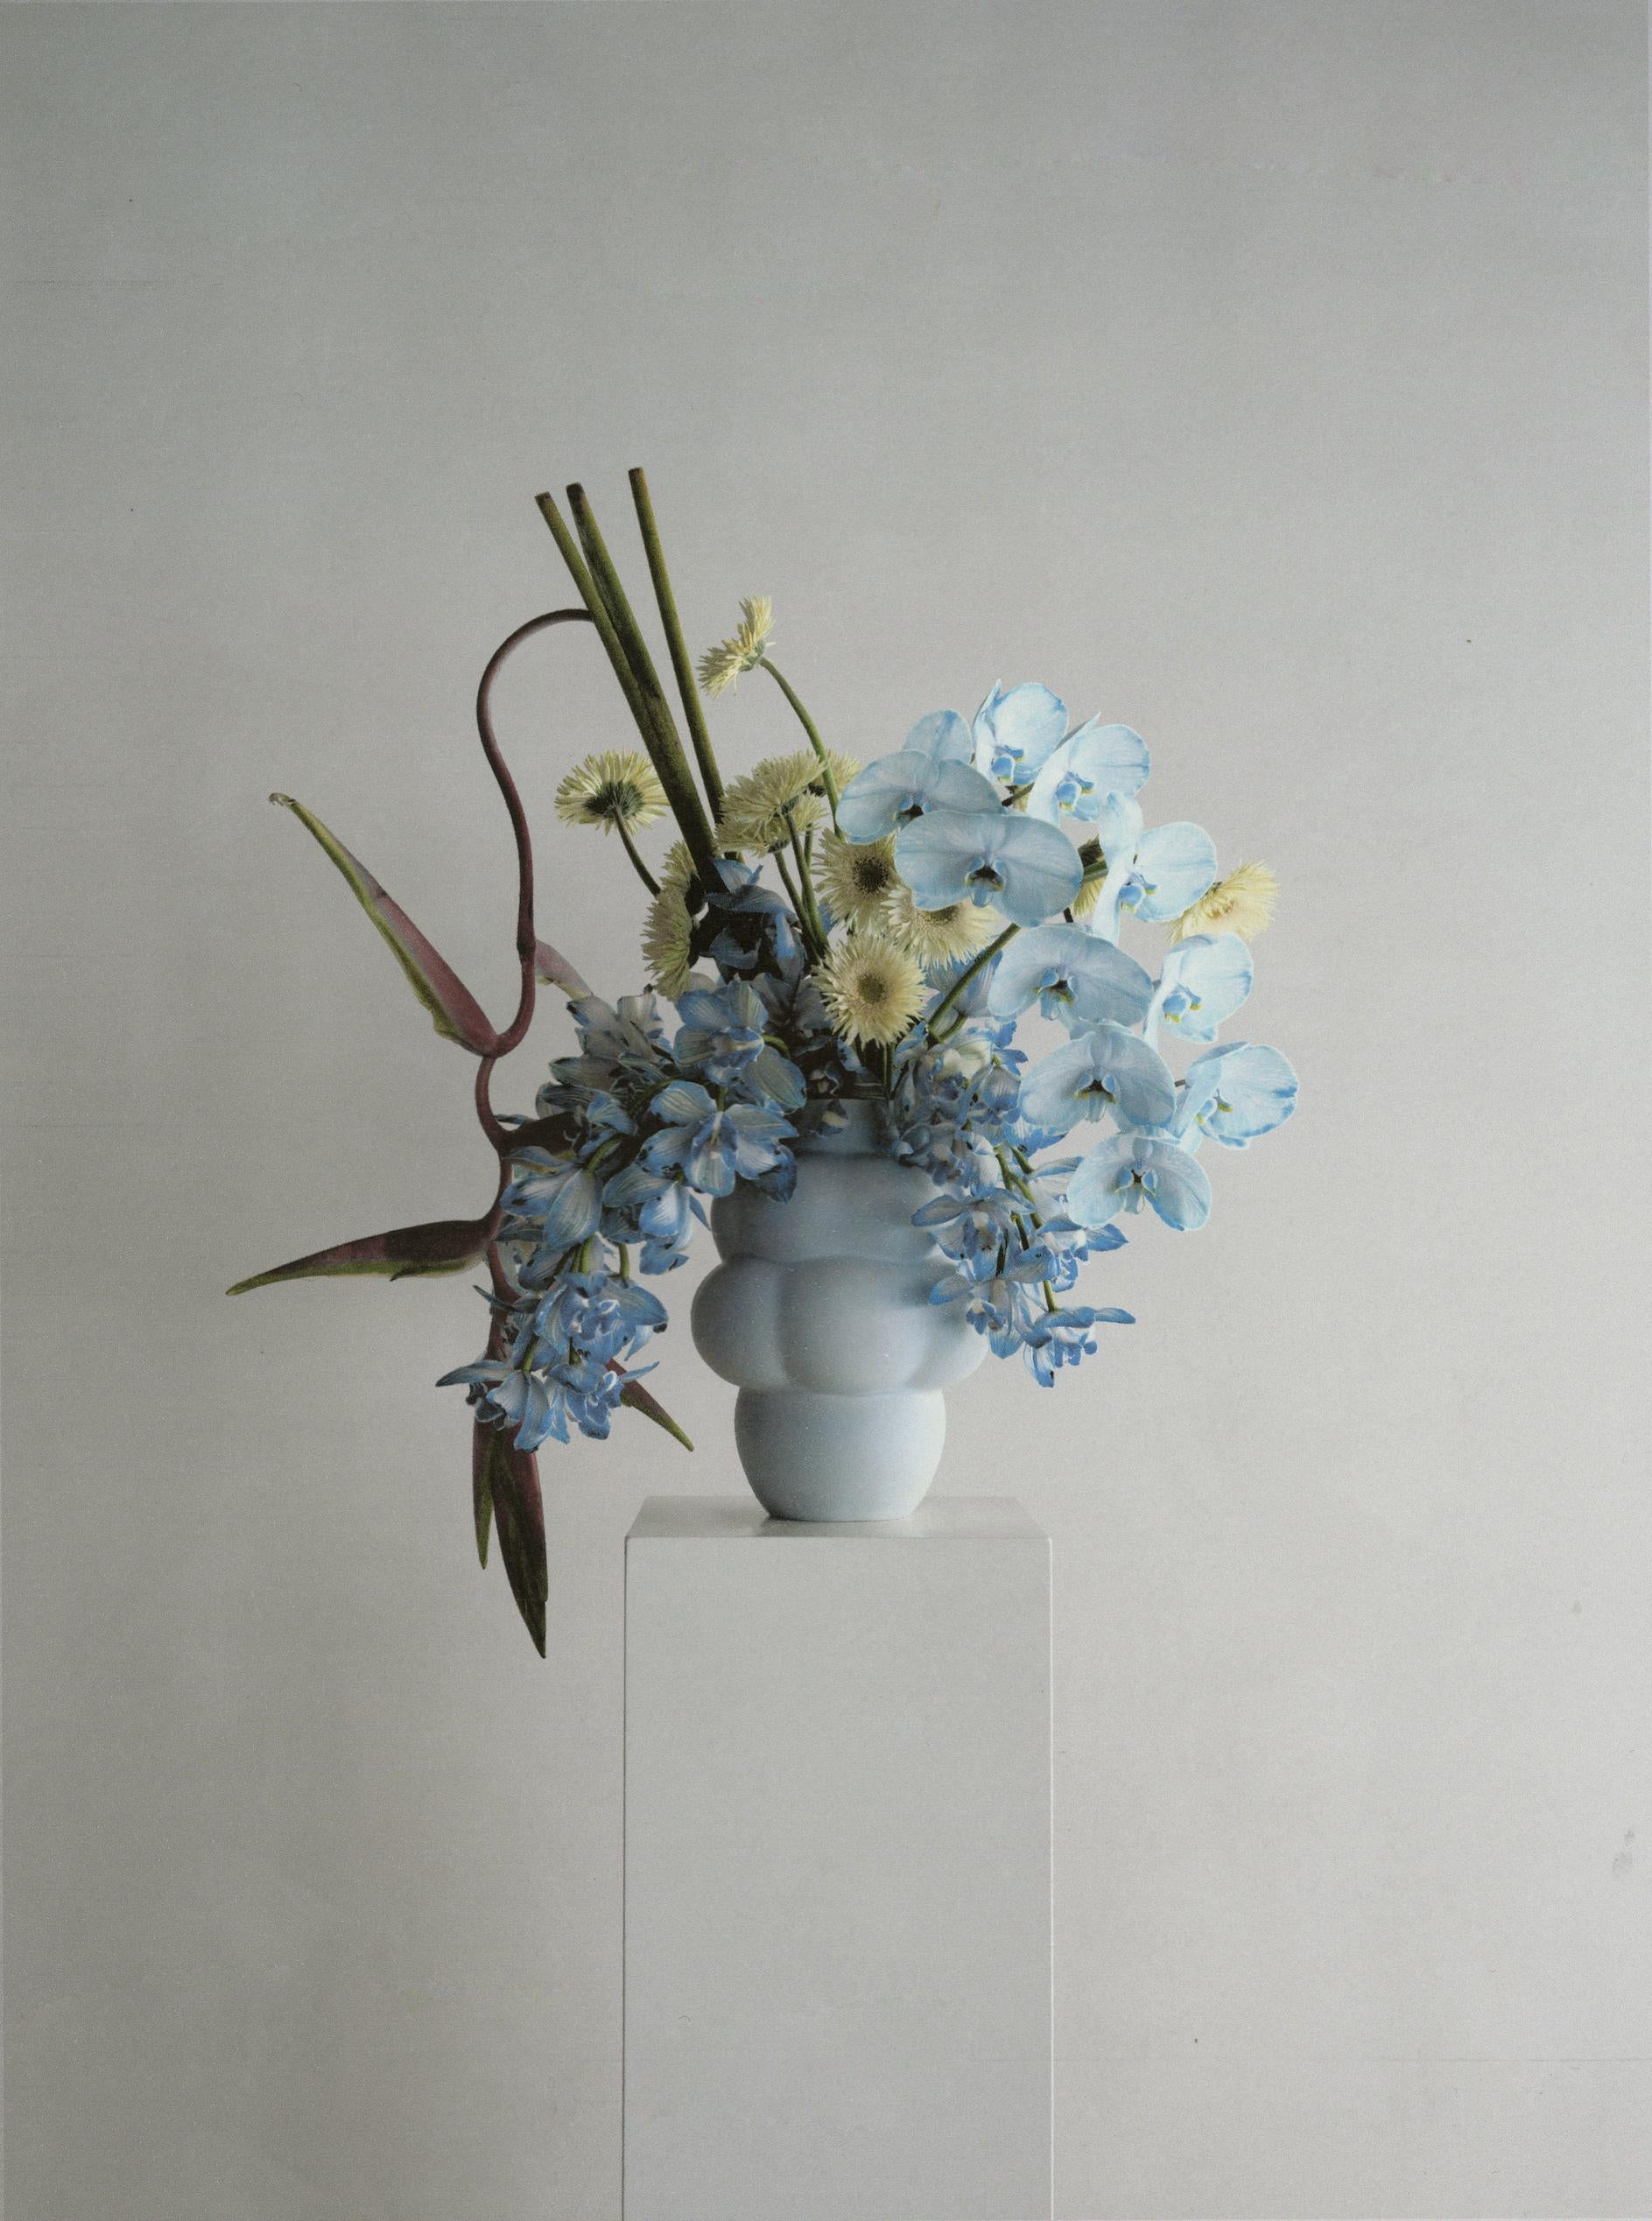 Balloon vase 04 sky blue.
Handmade ceramic vase made by Danish artist Louise Roe.

Measures: Ø10-24 / H32 cm

Sculptural object with clouds shape. 

About the artist:
LOUISE ROE is a Copenhagen based interior design brand, established in